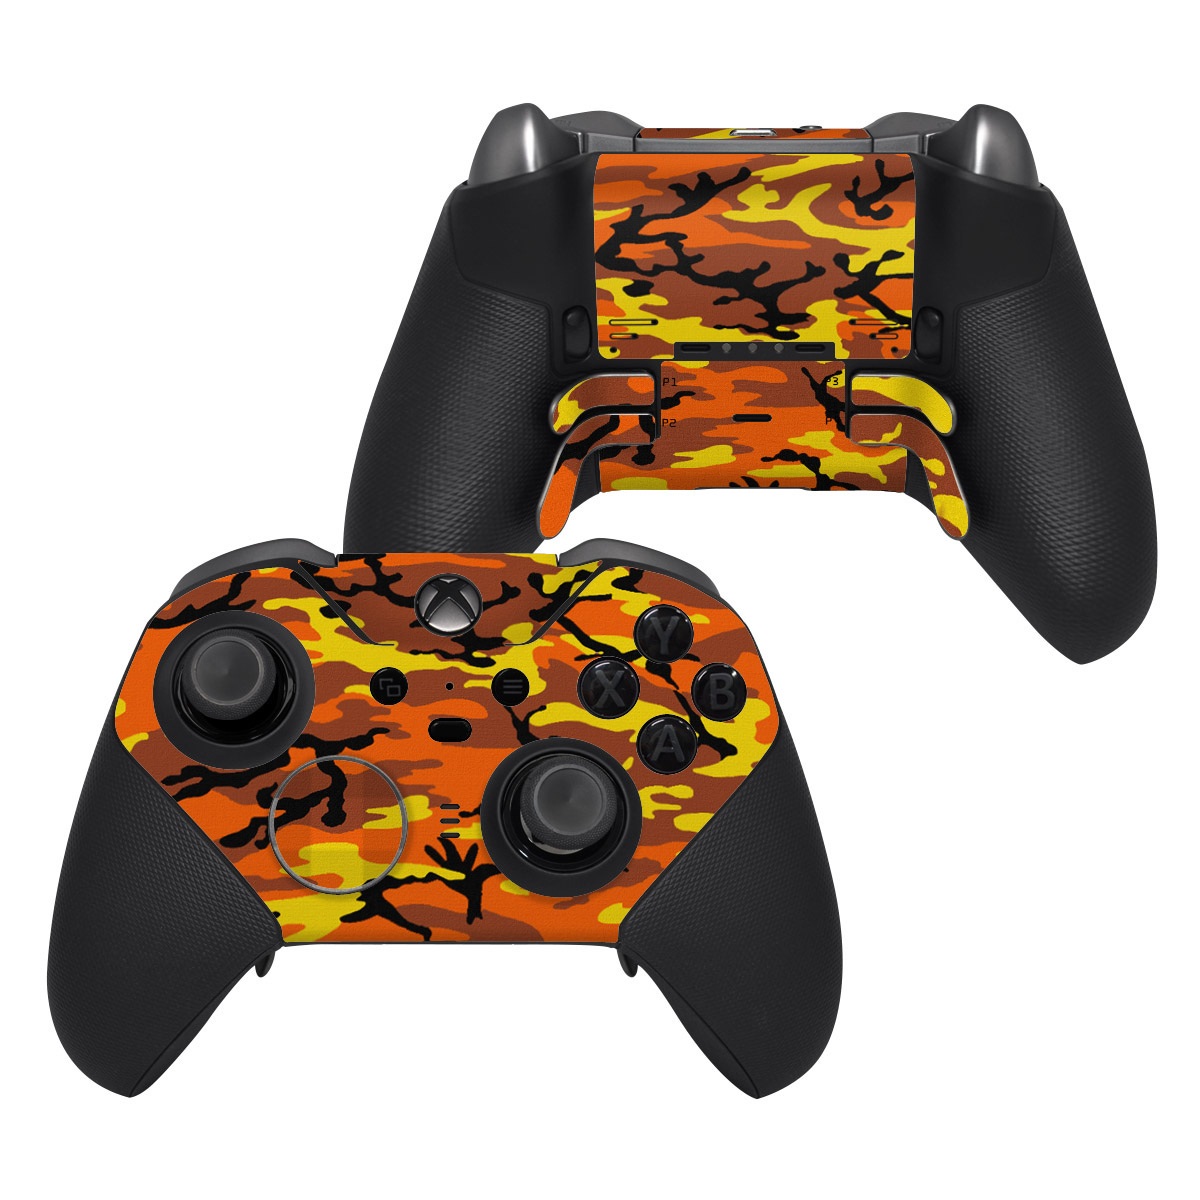 Xbox Elite Controller Series 2 Skin design of Military camouflage, Orange, Pattern, Camouflage, Yellow, Brown, Uniform, Design, Tree, Wildlife, with red, green, black colors